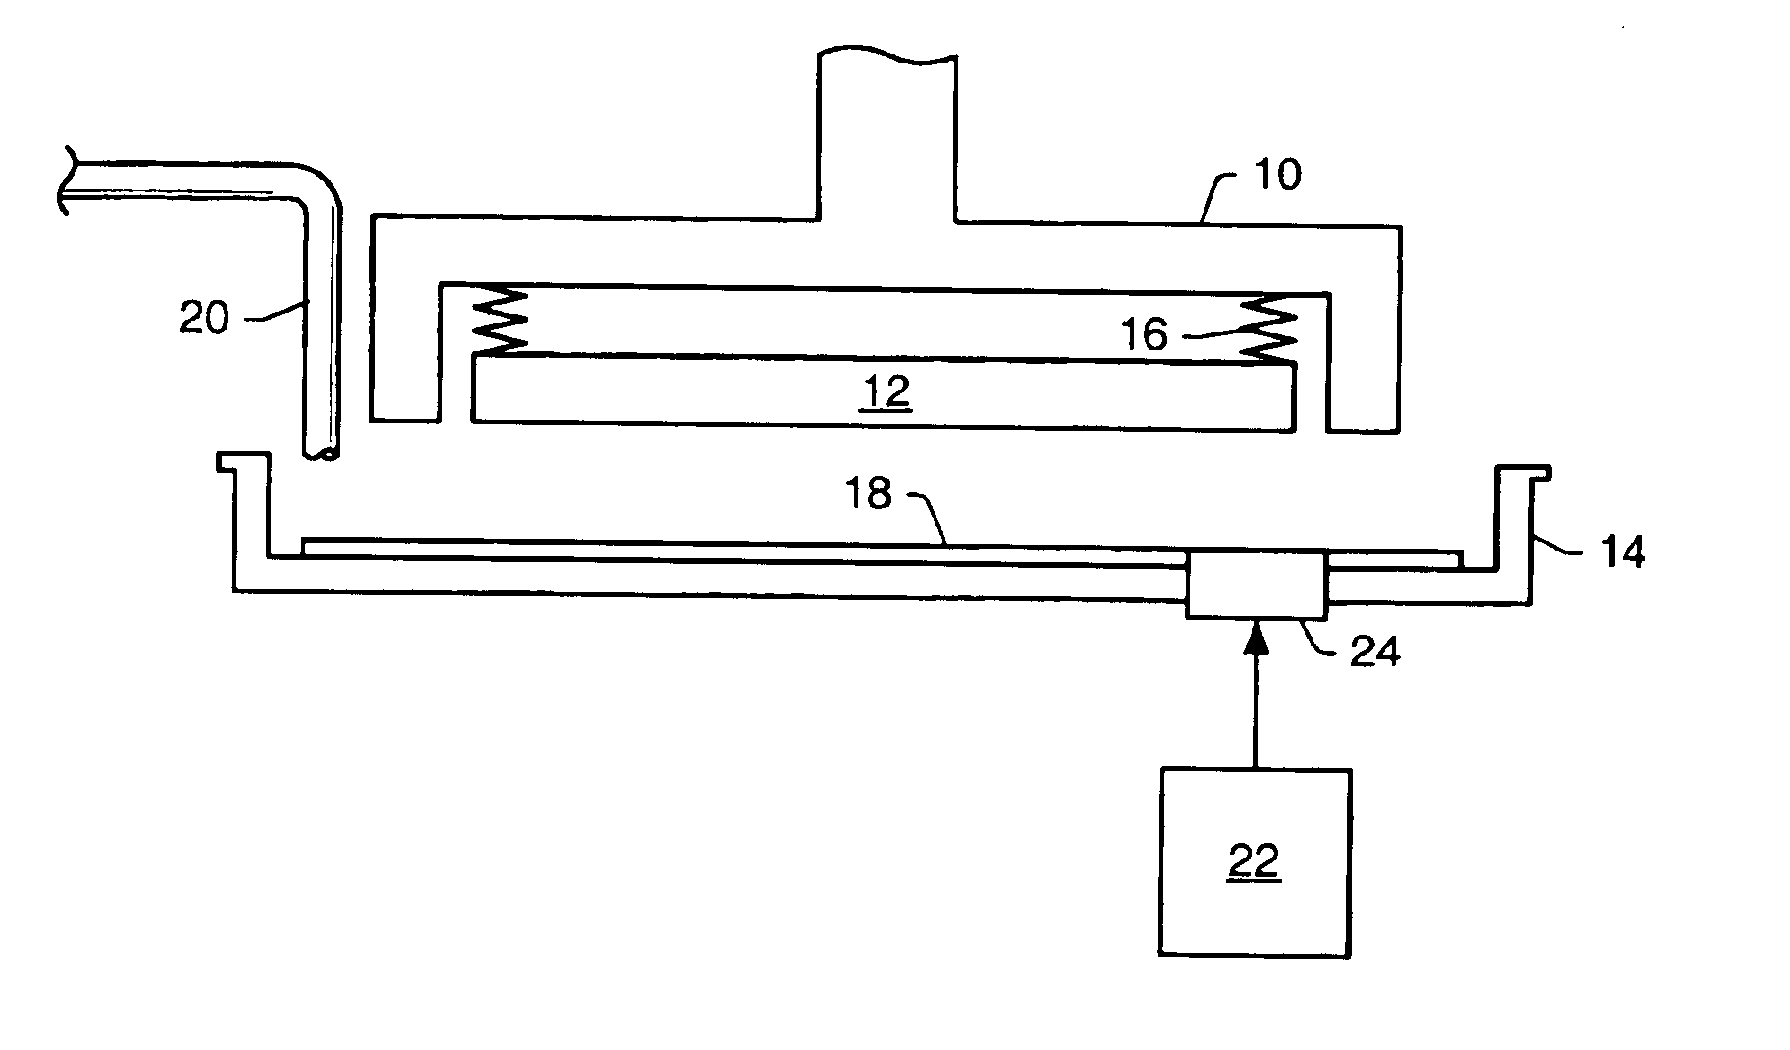 Systems and methods for characterizing a polishing process